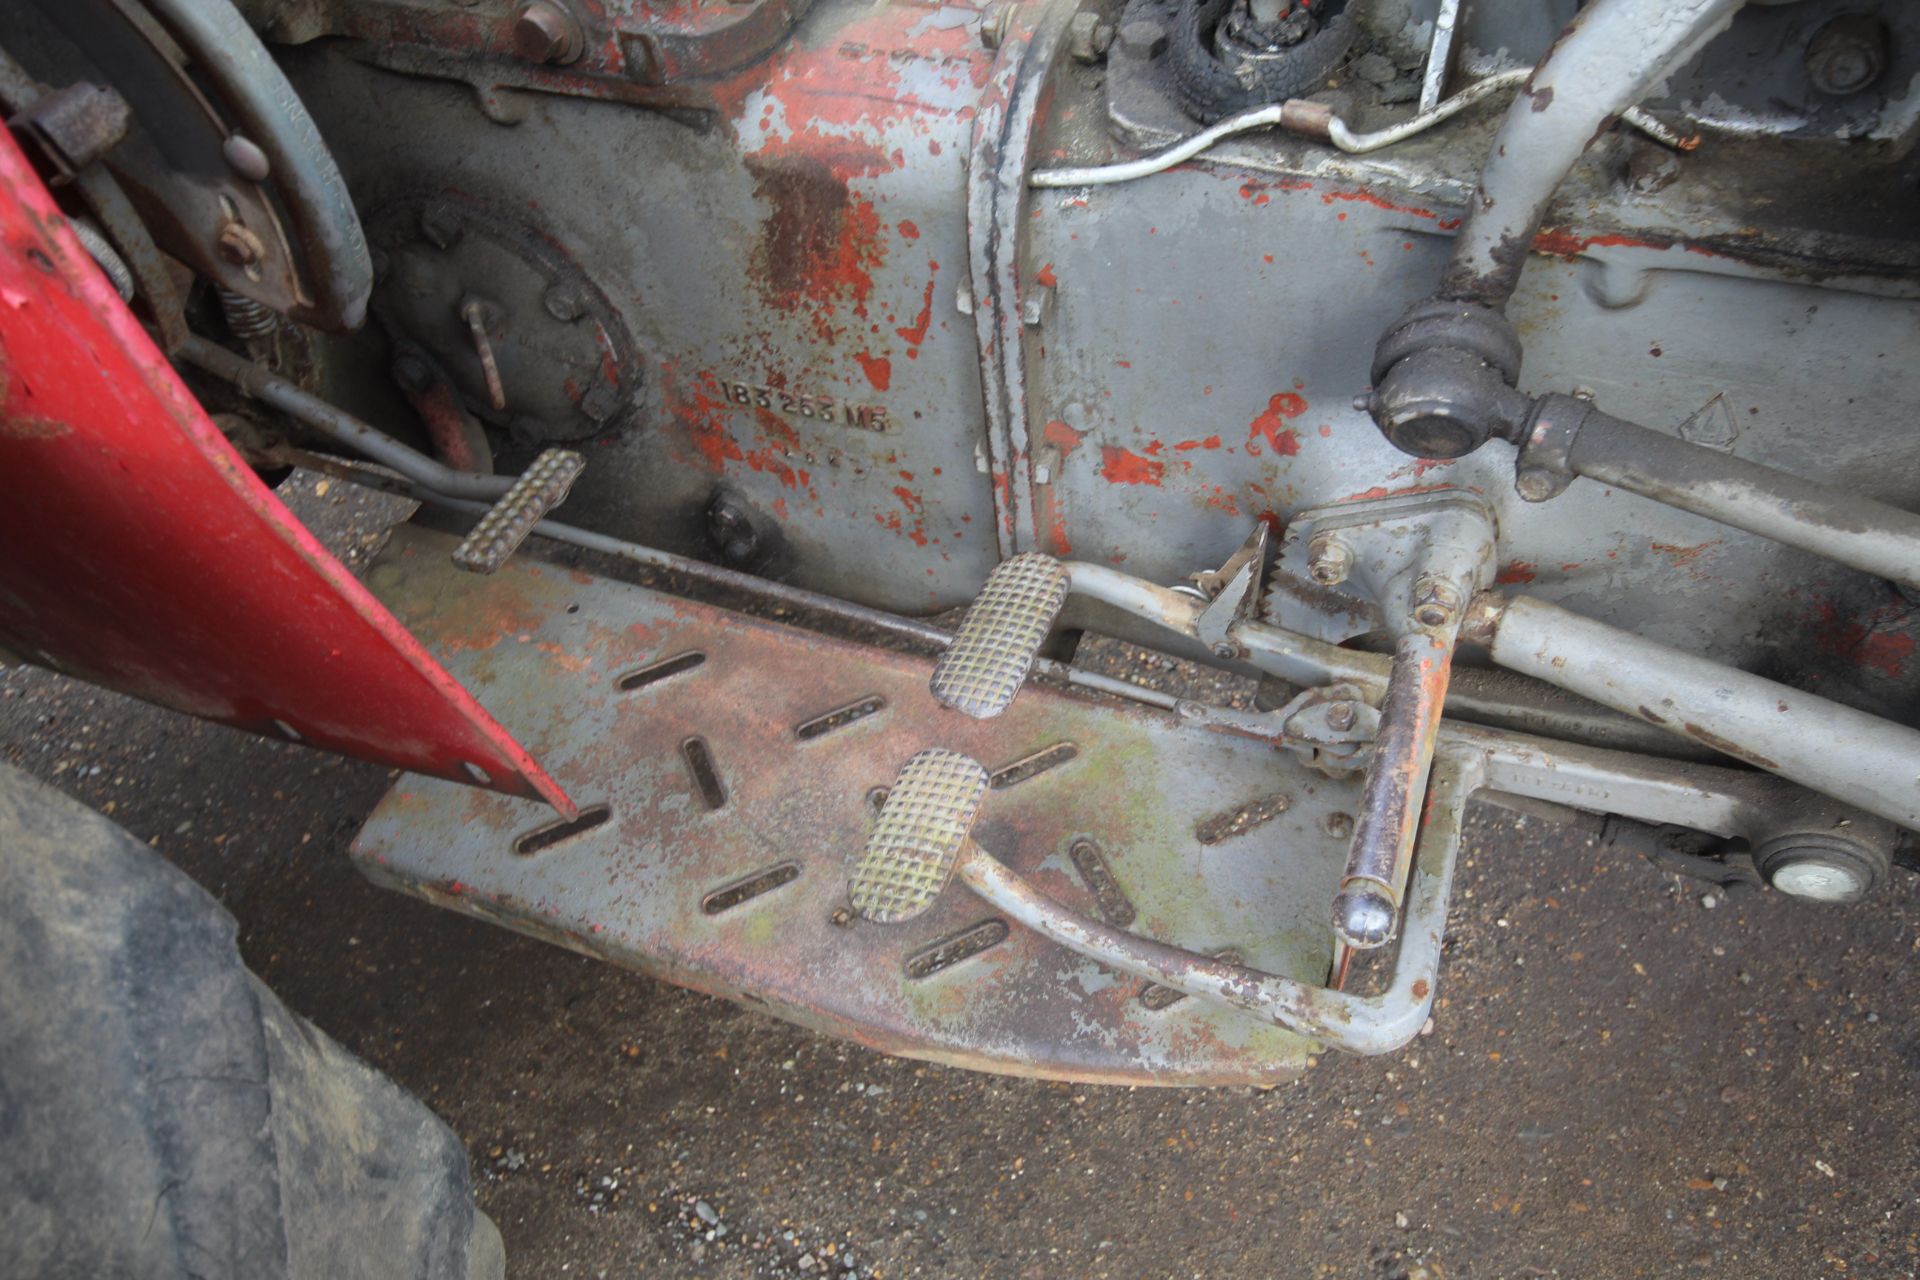 Massey Ferguson 35X 2WD tractor. 1963. Serial number SNMY313859. 11-28 rear wheels and tyres. - Image 30 of 43